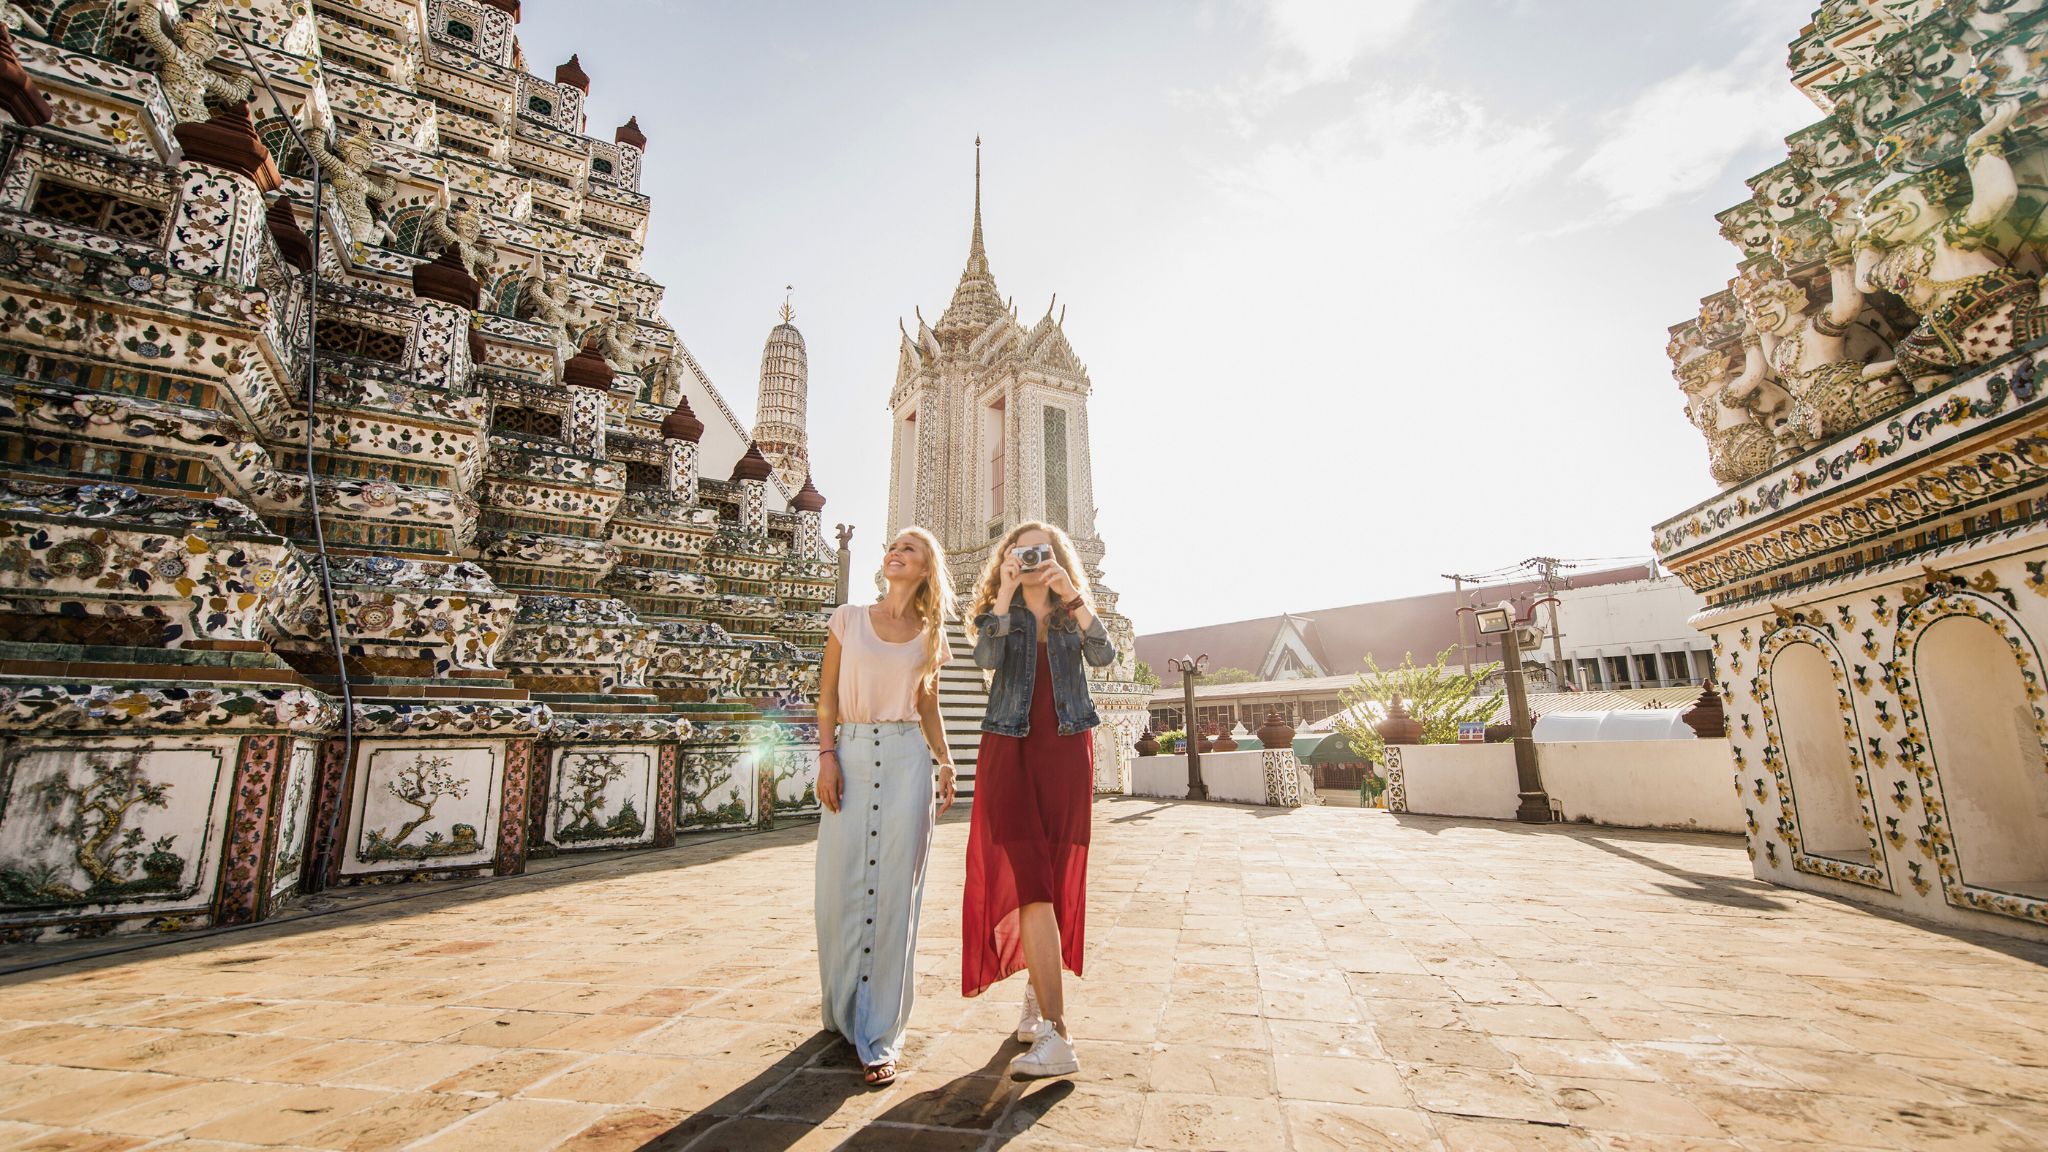 Day 6 Explore The Hidden Gems Of Bangkok On Your Own